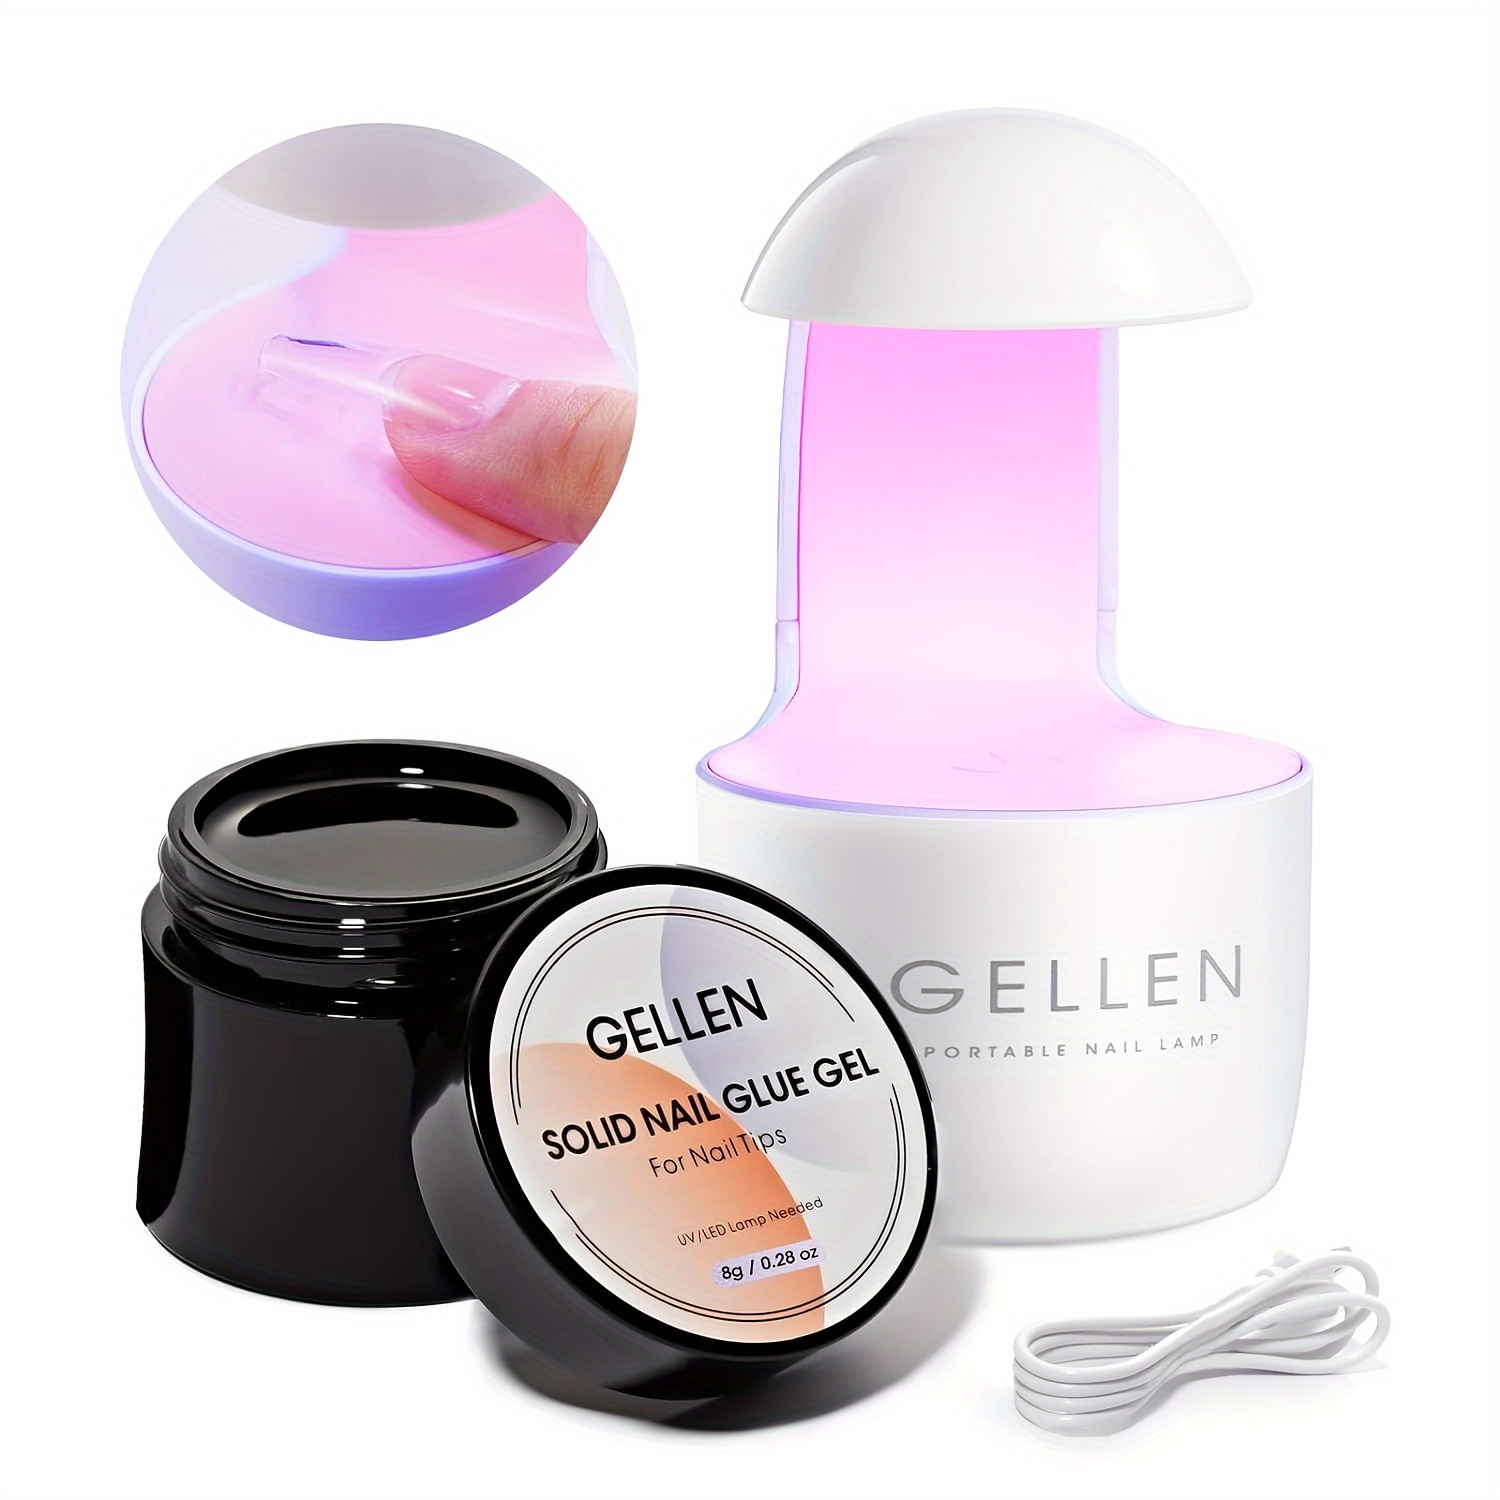 

Gellen Solid Nail Tip Glue Kit, 15g Nail Tip Glue Gel And Mini Uv Light Led Lamp For Nail Cured, Solid Press On Nail Glue For Acrylic Fake Nail Tips, Solid Gel Glue For Nails Salon Art Diy At Home